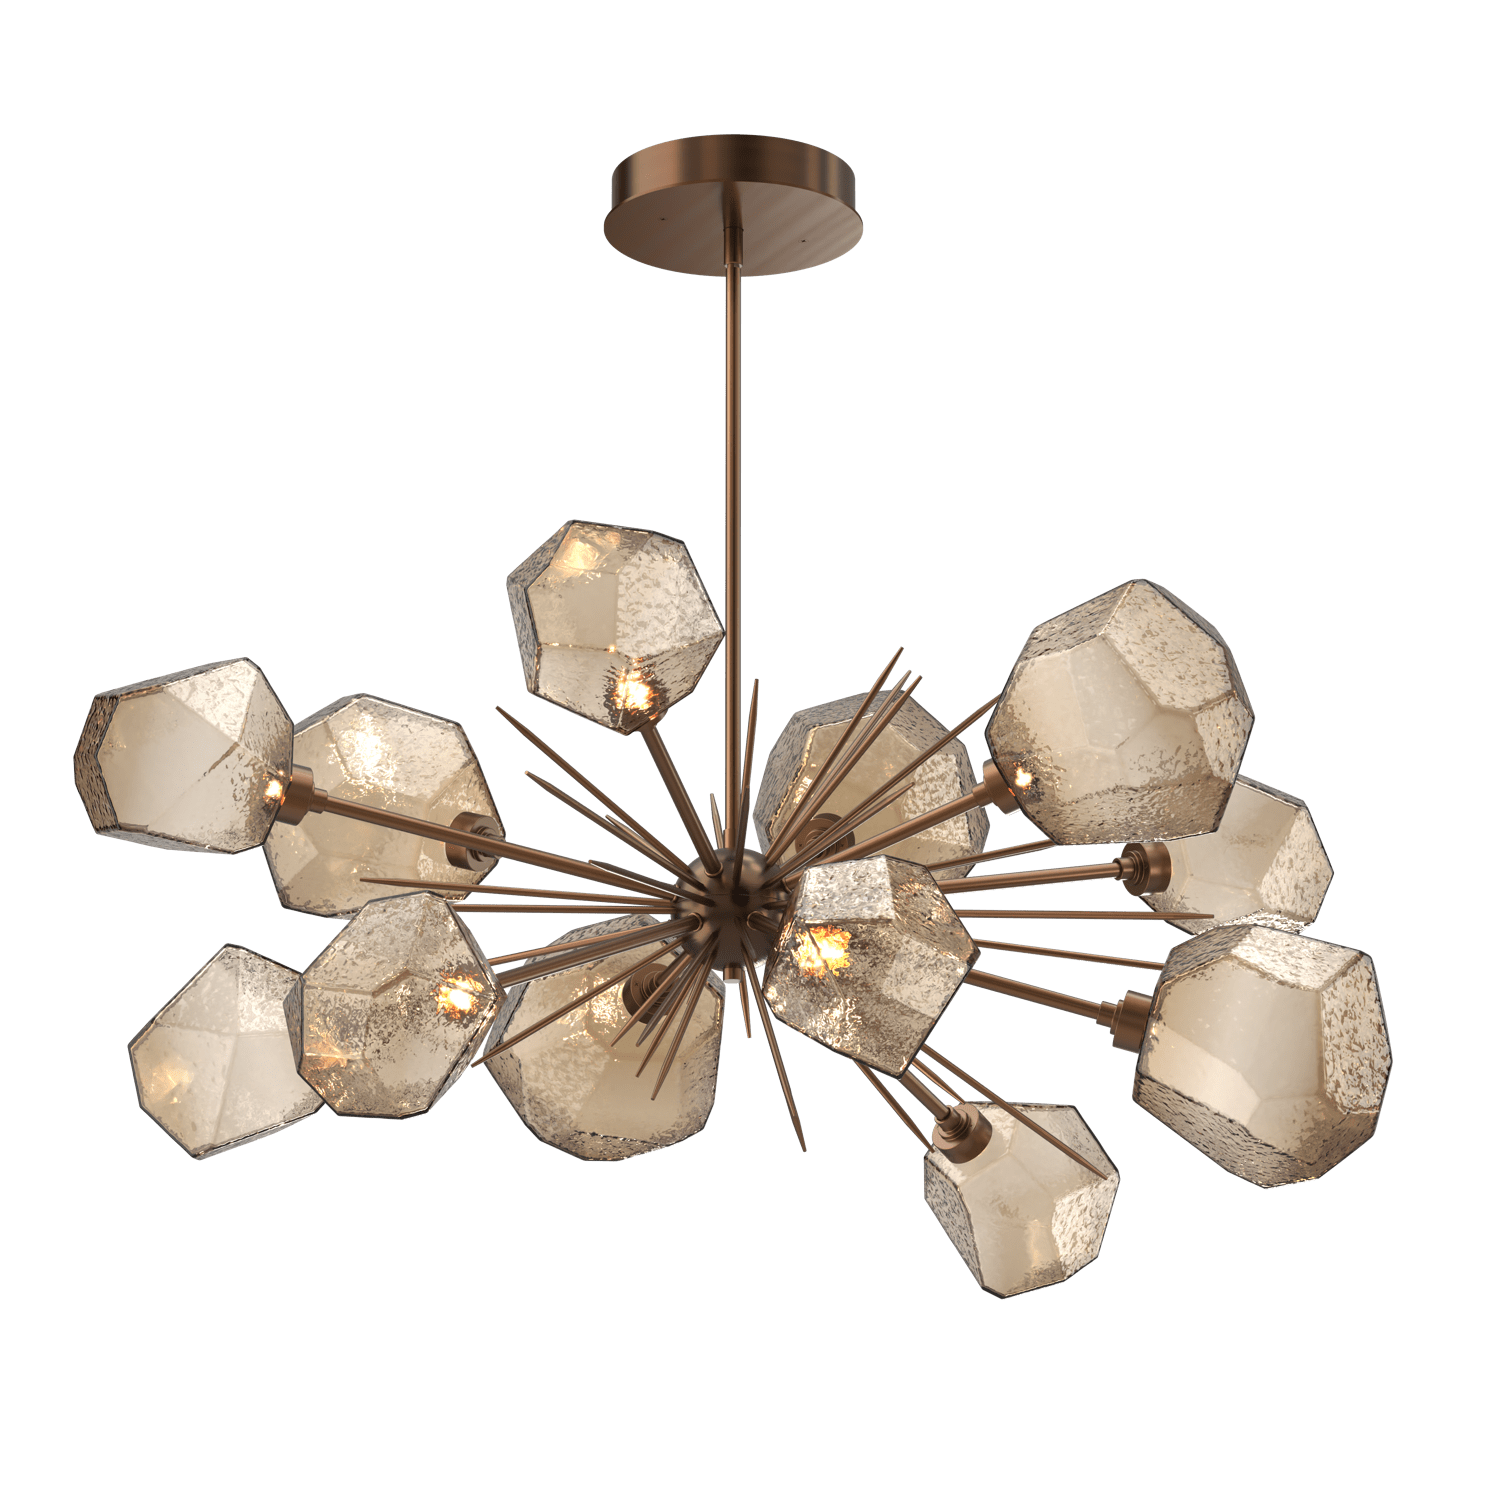 PLB0039-0D-RB-B-Hammerton-Studio-Gem-43-inch-oval-starburst-chandelier-with-oil-rubbed-bronze-finish-and-bronze-blown-glass-shades-and-LED-lamping